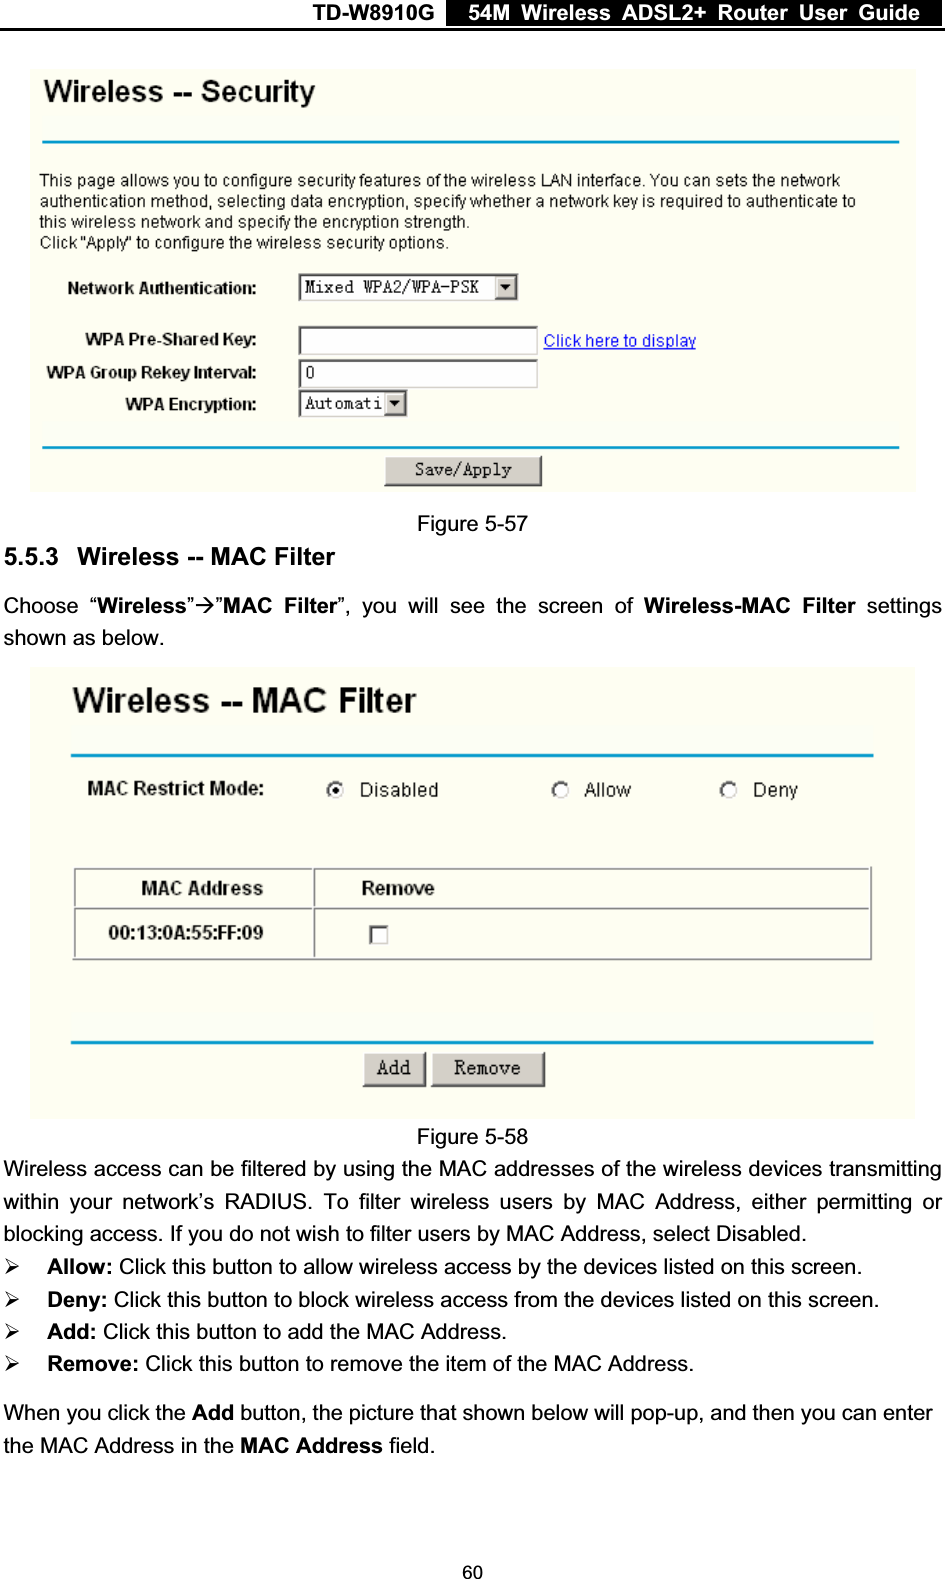 TD-W8910G    54M Wireless ADSL2+ Router User Guide  Figure 5-57 5.5.3 Wireless -- MAC Filter Choose “Wireless”Æ”MAC Filter”, you will see the screen of Wireless-MAC Filter settings shown as below. Figure 5-58 Wireless access can be filtered by using the MAC addresses of the wireless devices transmitting within your network’s RADIUS. To filter wireless users by MAC Address, either permitting or blocking access. If you do not wish to filter users by MAC Address, select Disabled. ¾Allow: Click this button to allow wireless access by the devices listed on this screen. ¾Deny: Click this button to block wireless access from the devices listed on this screen. ¾Add: Click this button to add the MAC Address. ¾Remove: Click this button to remove the item of the MAC Address. When you click the Add button, the picture that shown below will pop-up, and then you can enter the MAC Address in the MAC Address field.  60